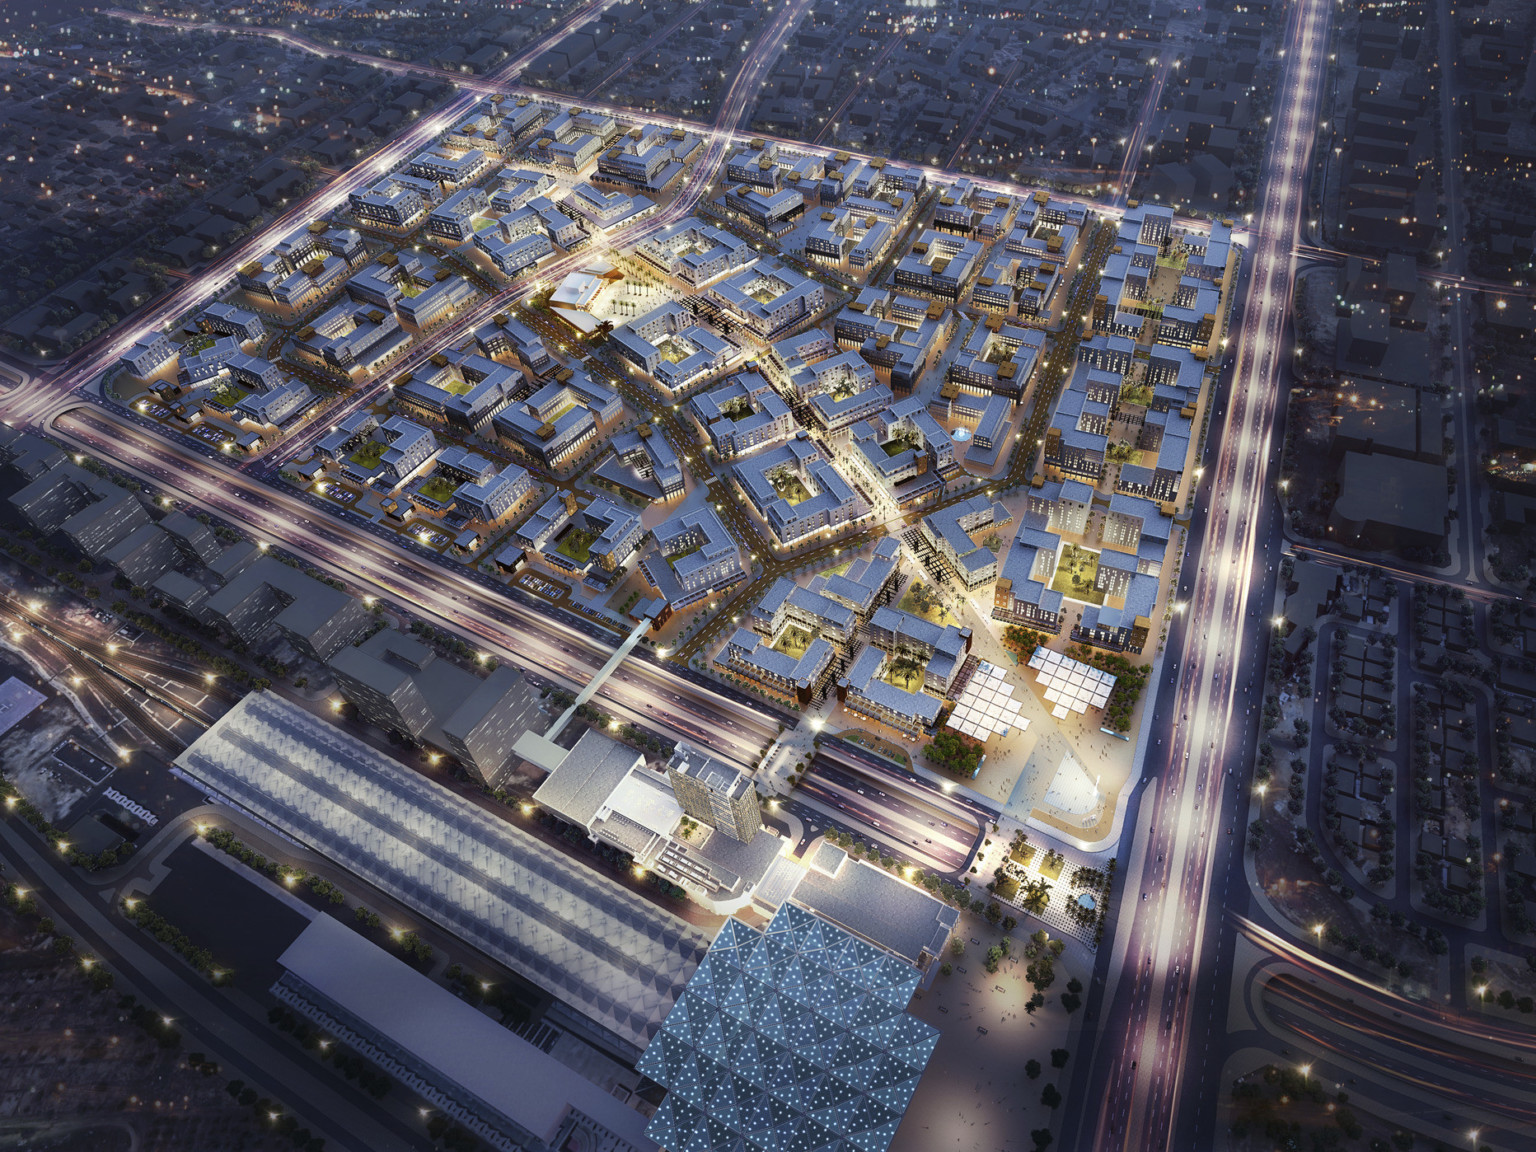 gridded master plan with vehicular street divisions and large commercial buildings with bright lights against dark sky